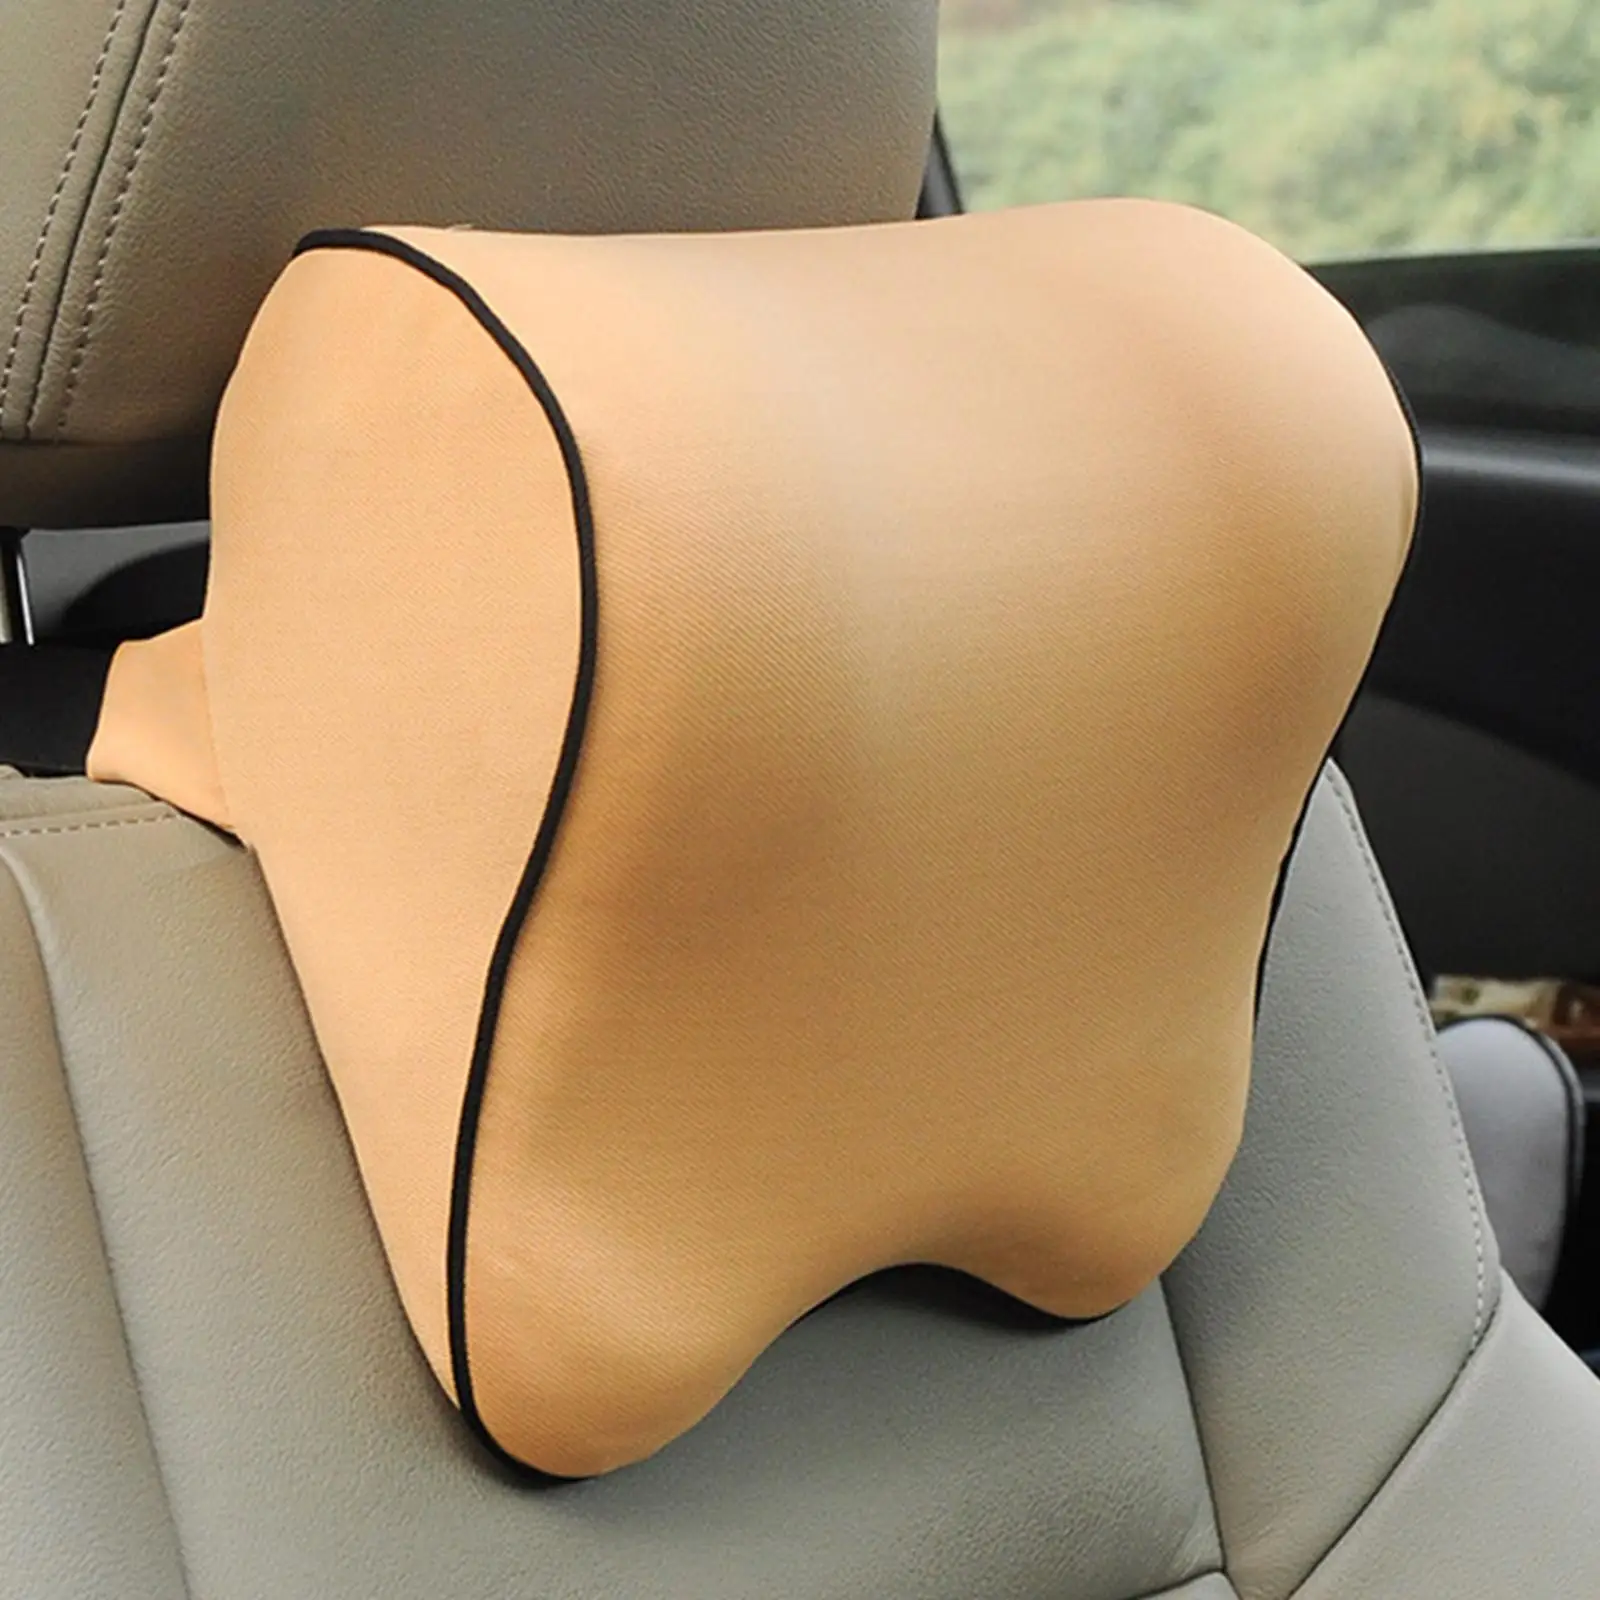 seat Headrest Neck Rest Cushion Memory Foam Breathable Removable Cover Headrest Cushion for Car Travelling Gaming Resting